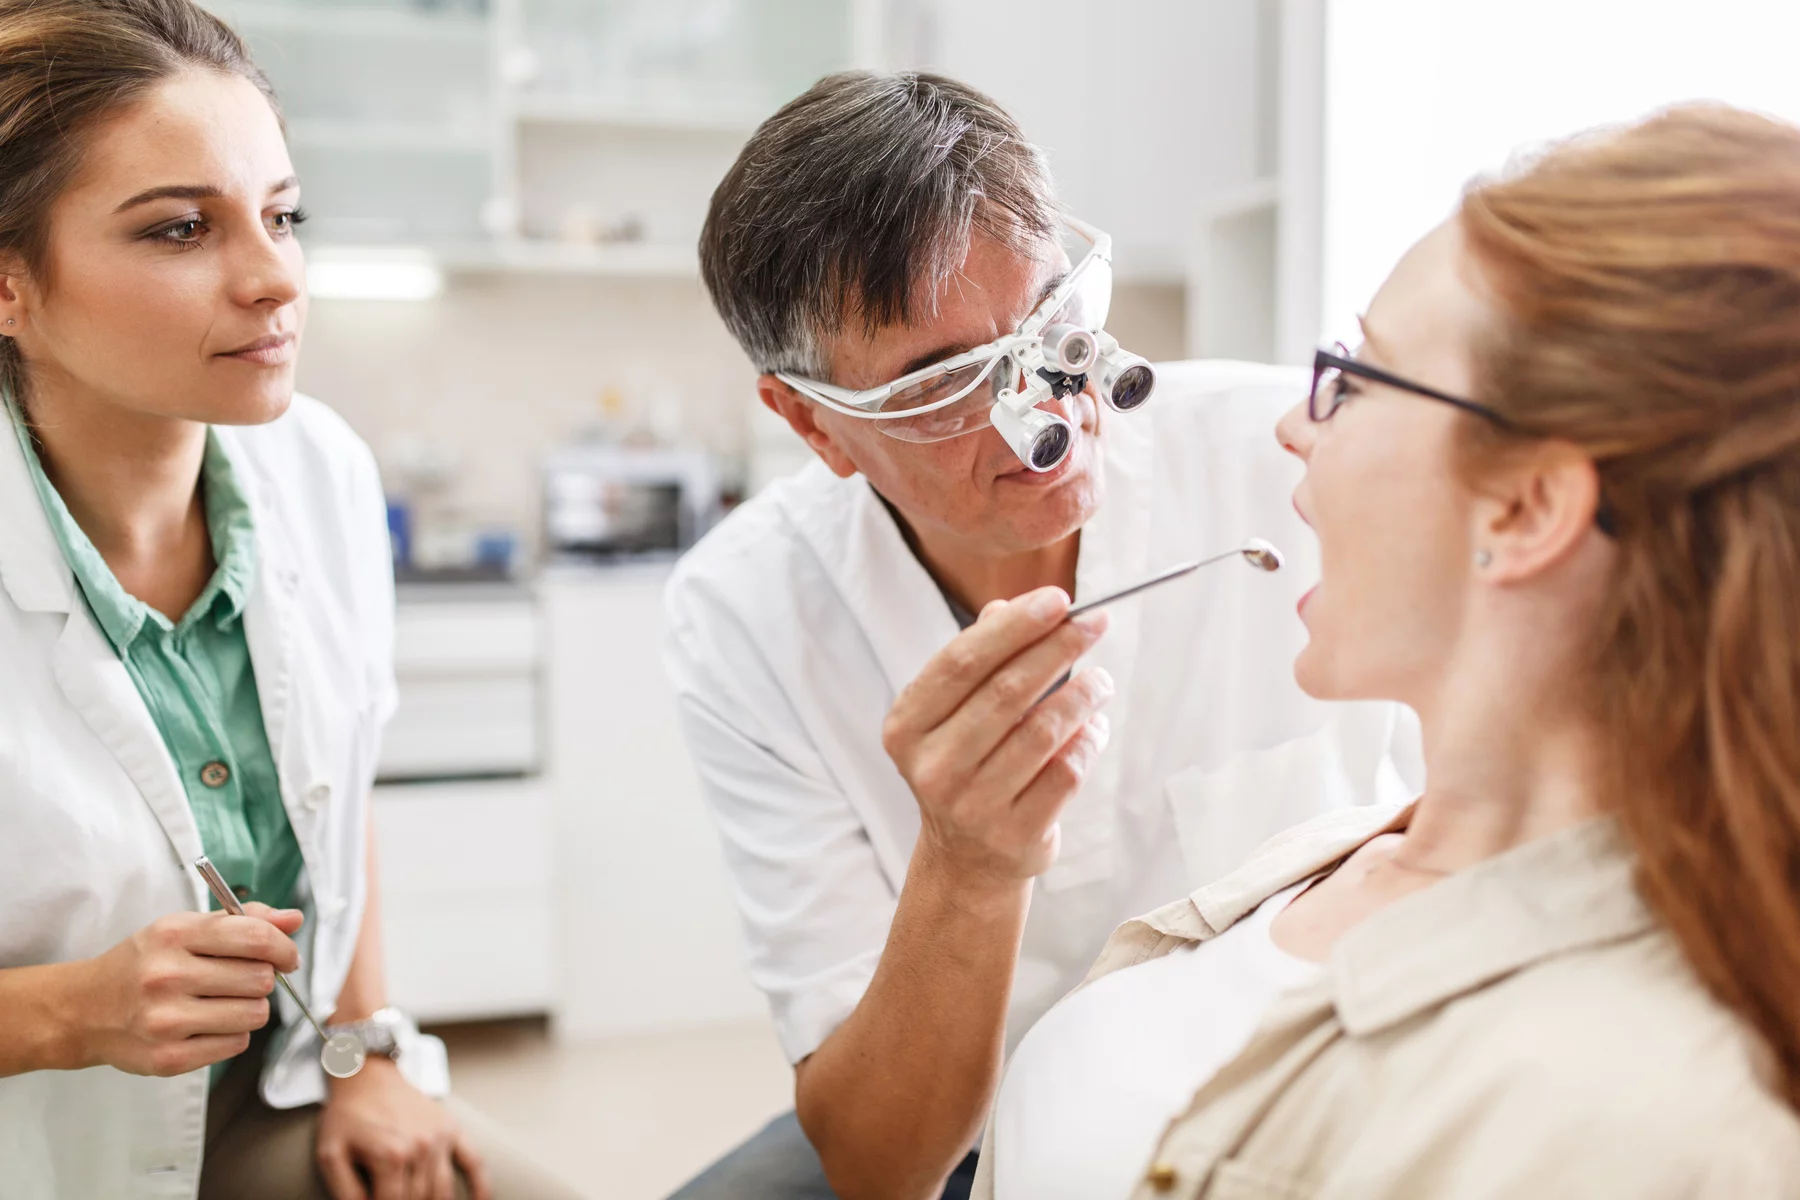 Dentist with specialized glasses and assistant examine patient's teeth